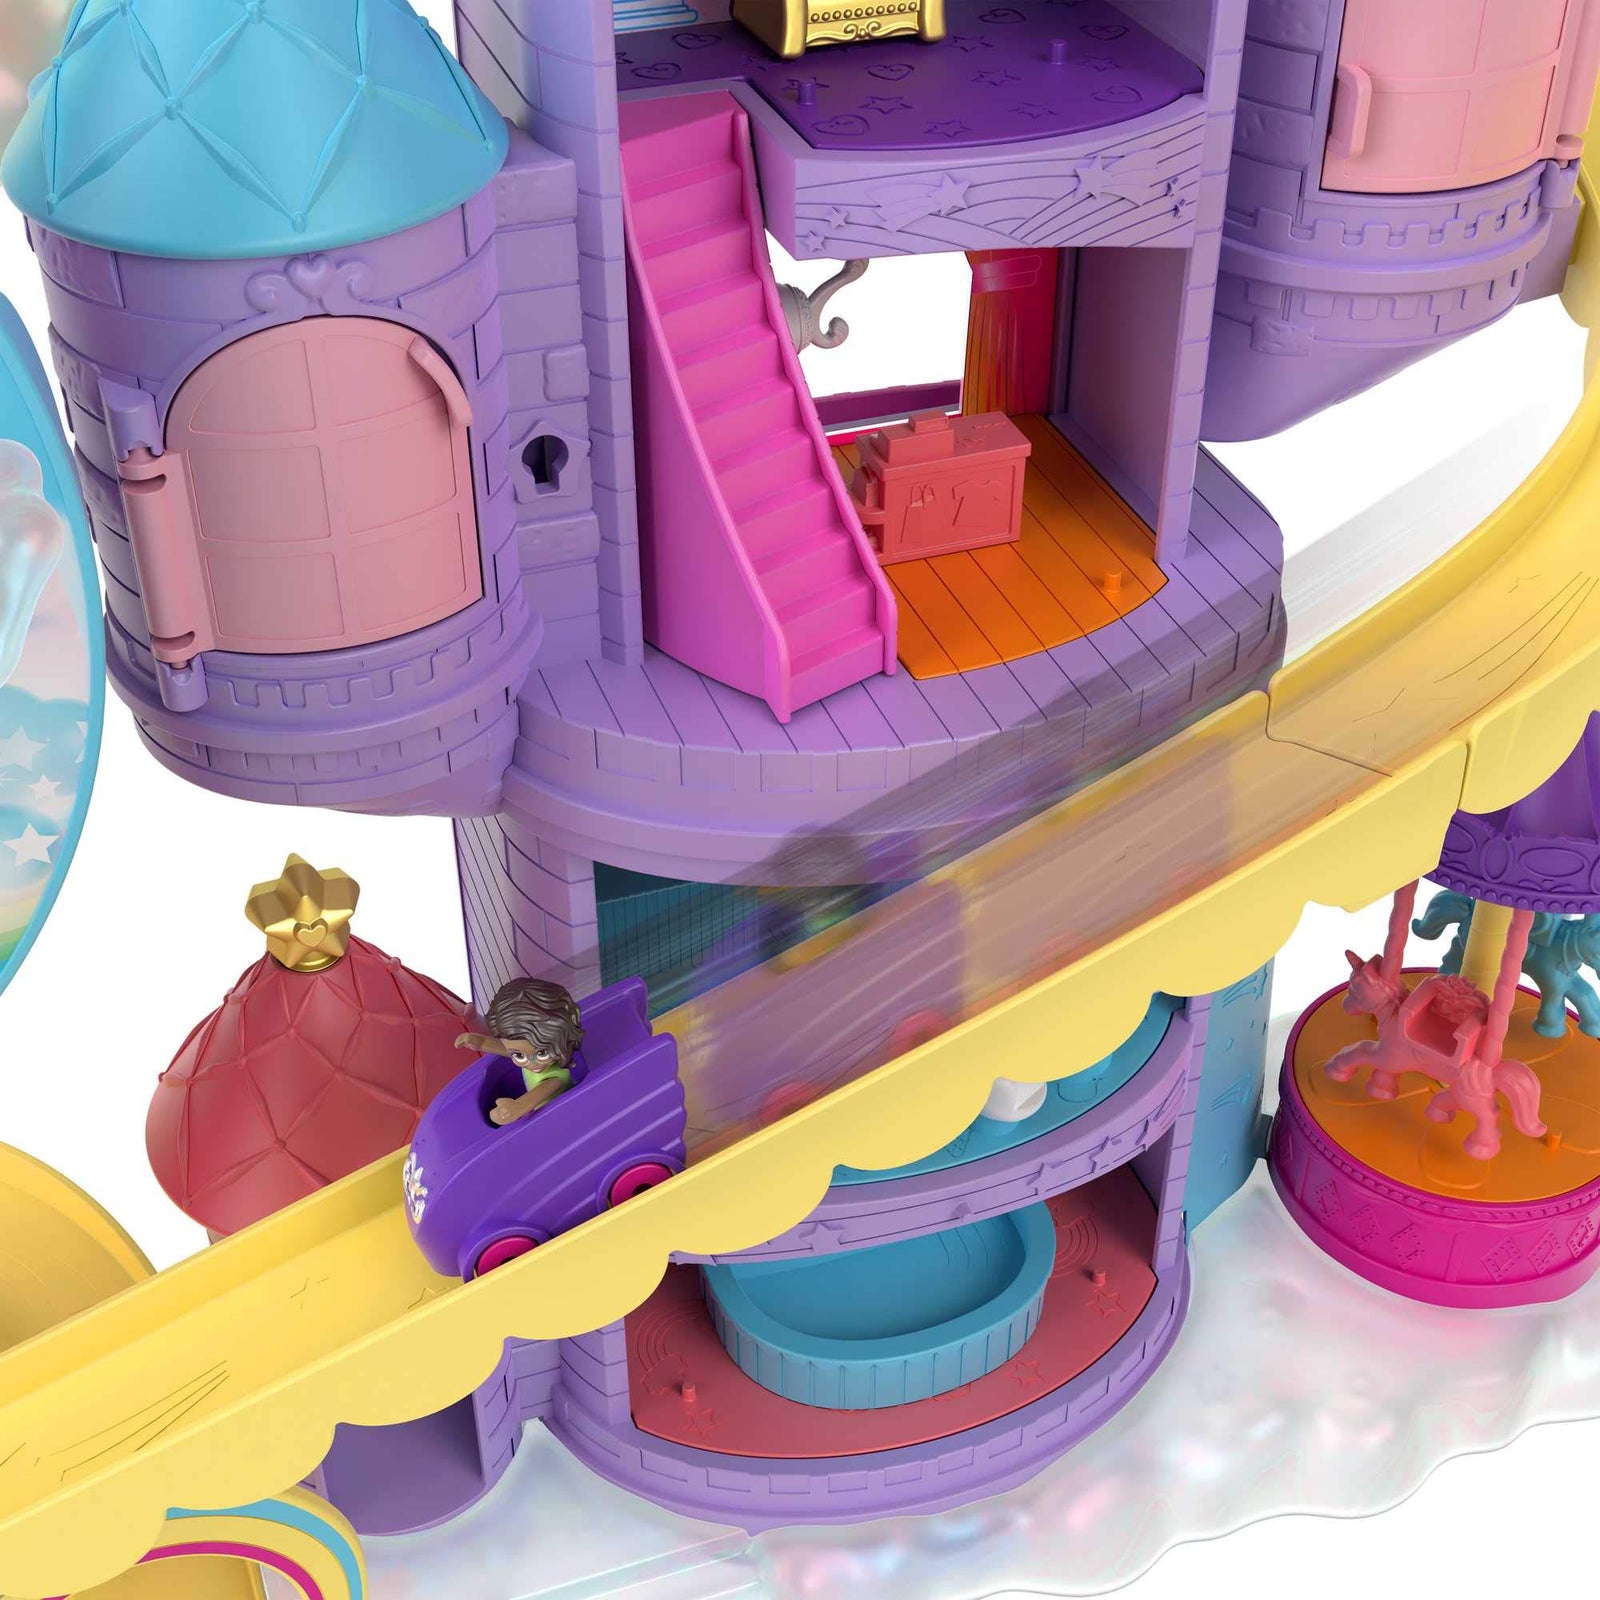 Mattel Polly Pocket Rainbow Funland Theme Park, 3 Rides, 7 Play Areas, Polly and Shani Dolls, 2 Unicorns & 25 Surprise Accessories (30 Total Play Pieces), Dispensing Feature for Surprises